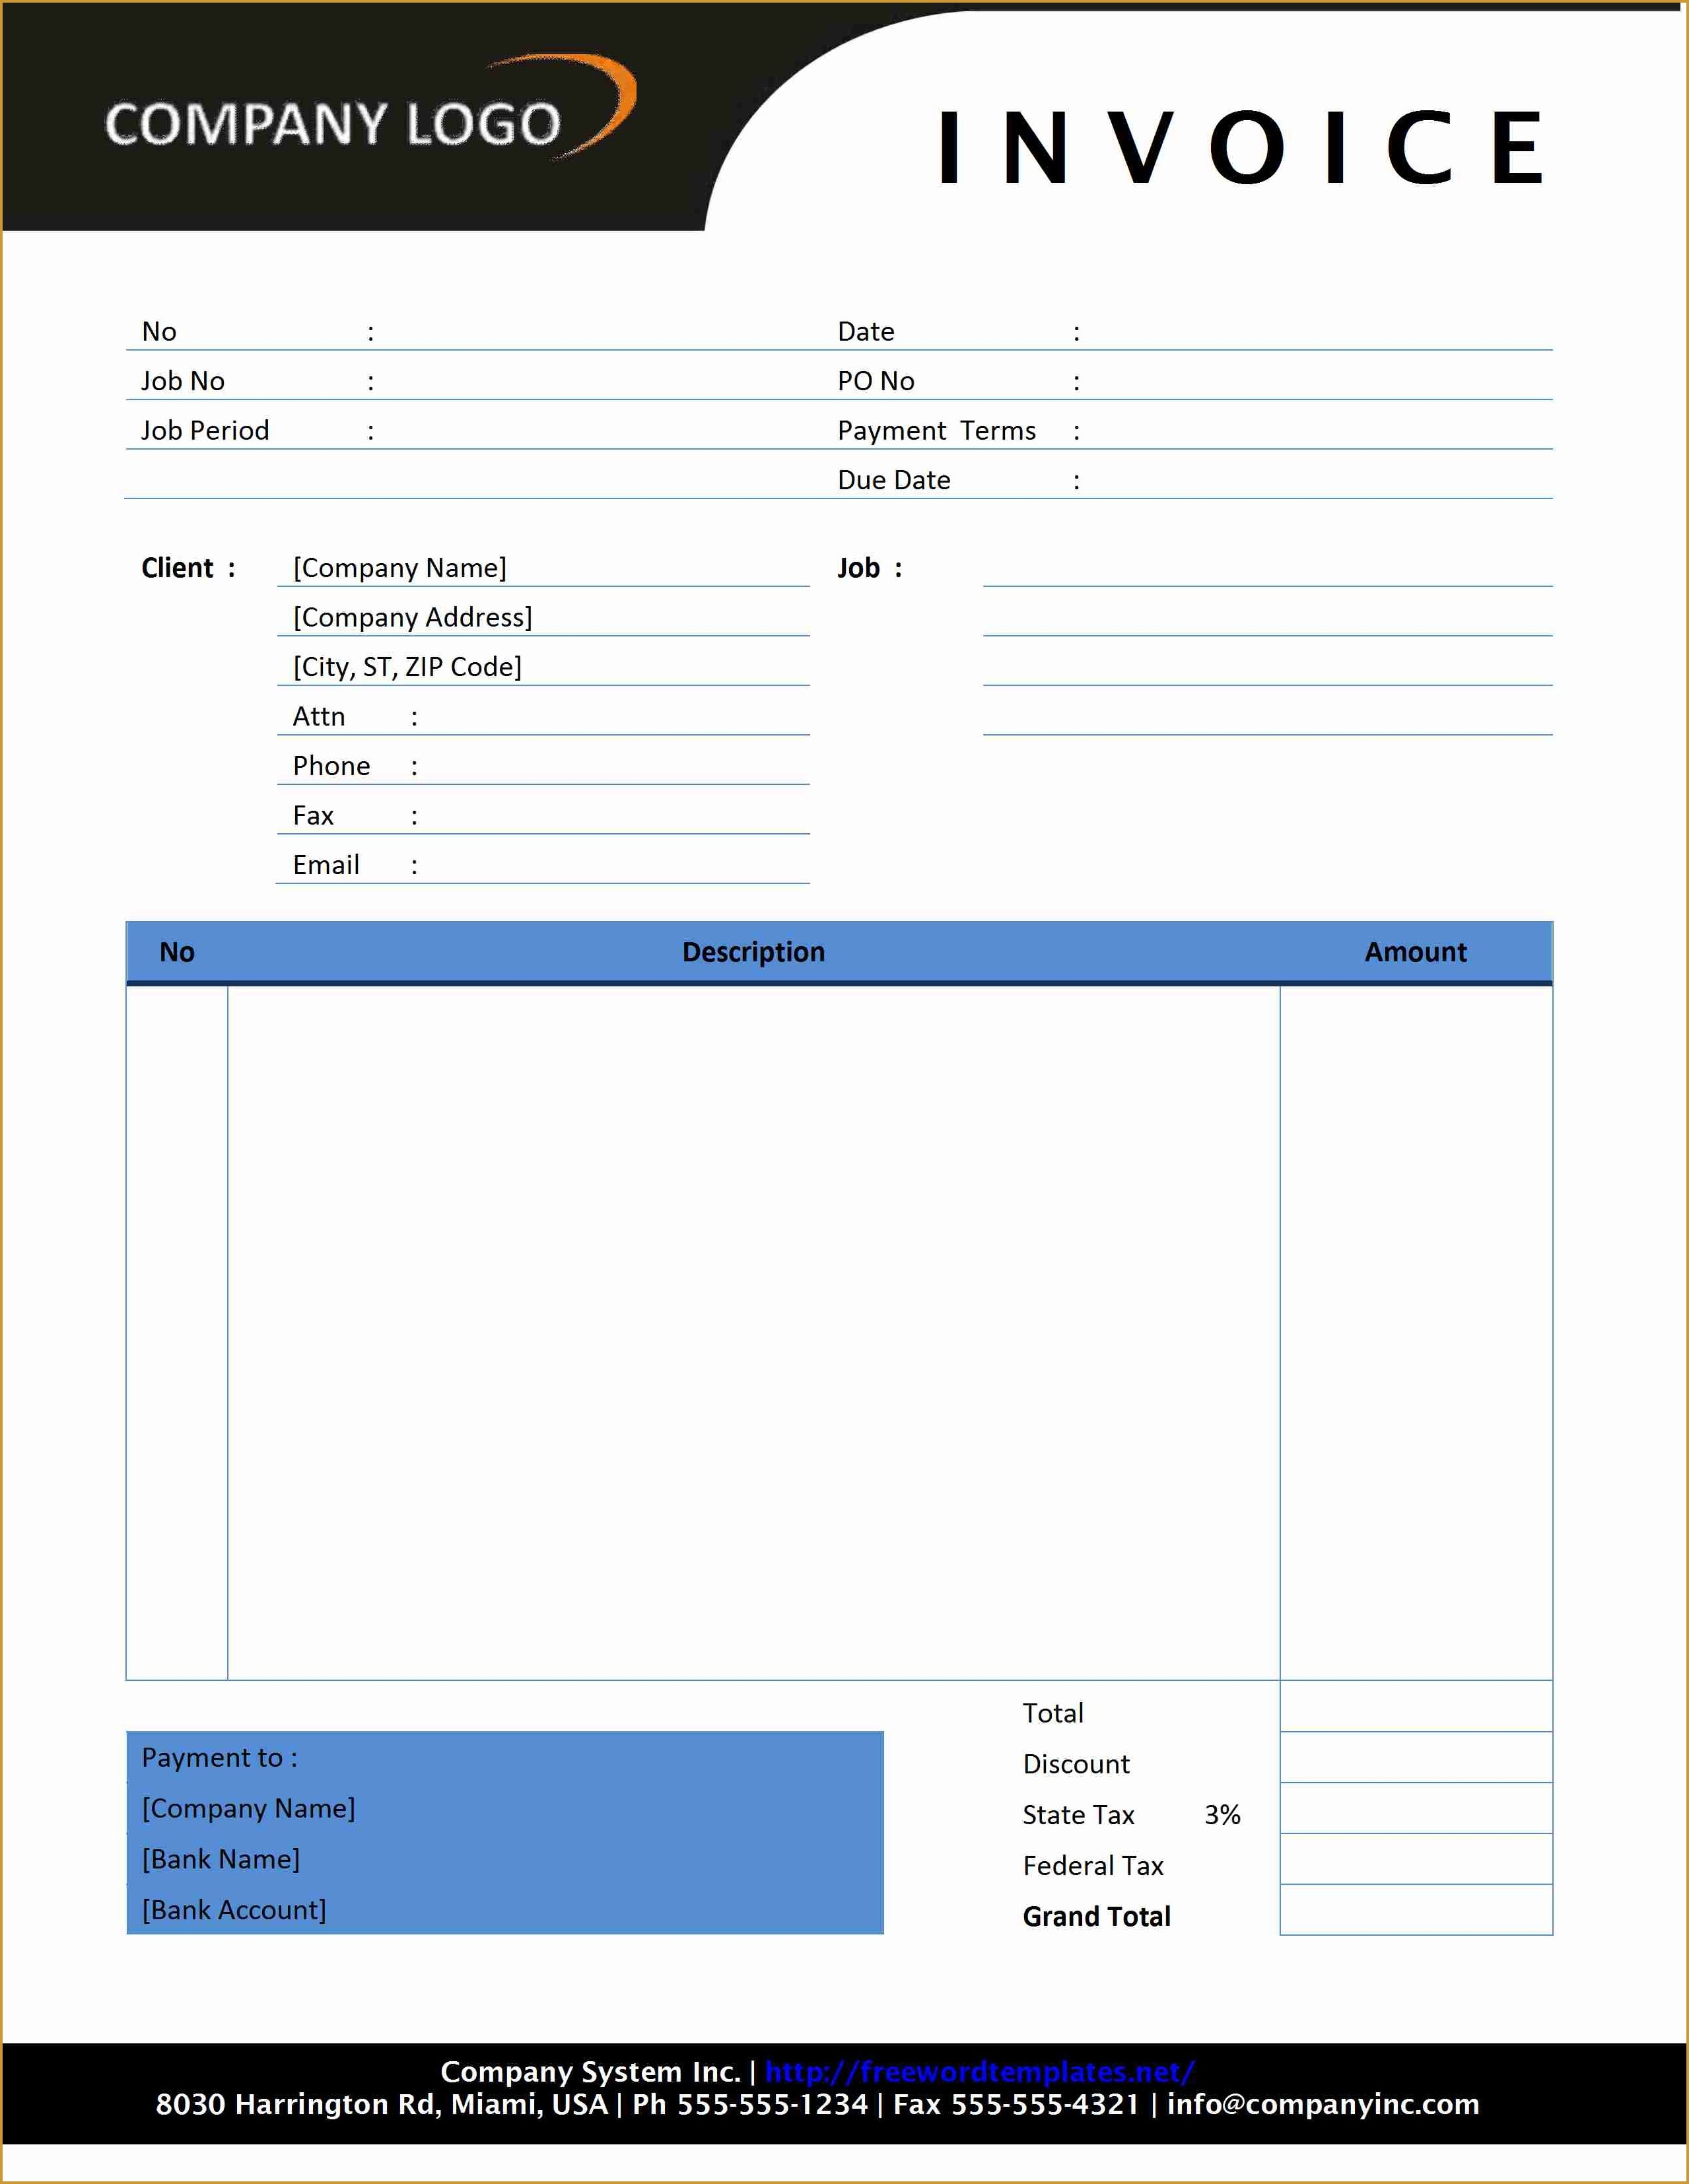 invoice microsoft word blank invoice templates in pdf word amp invoice on word